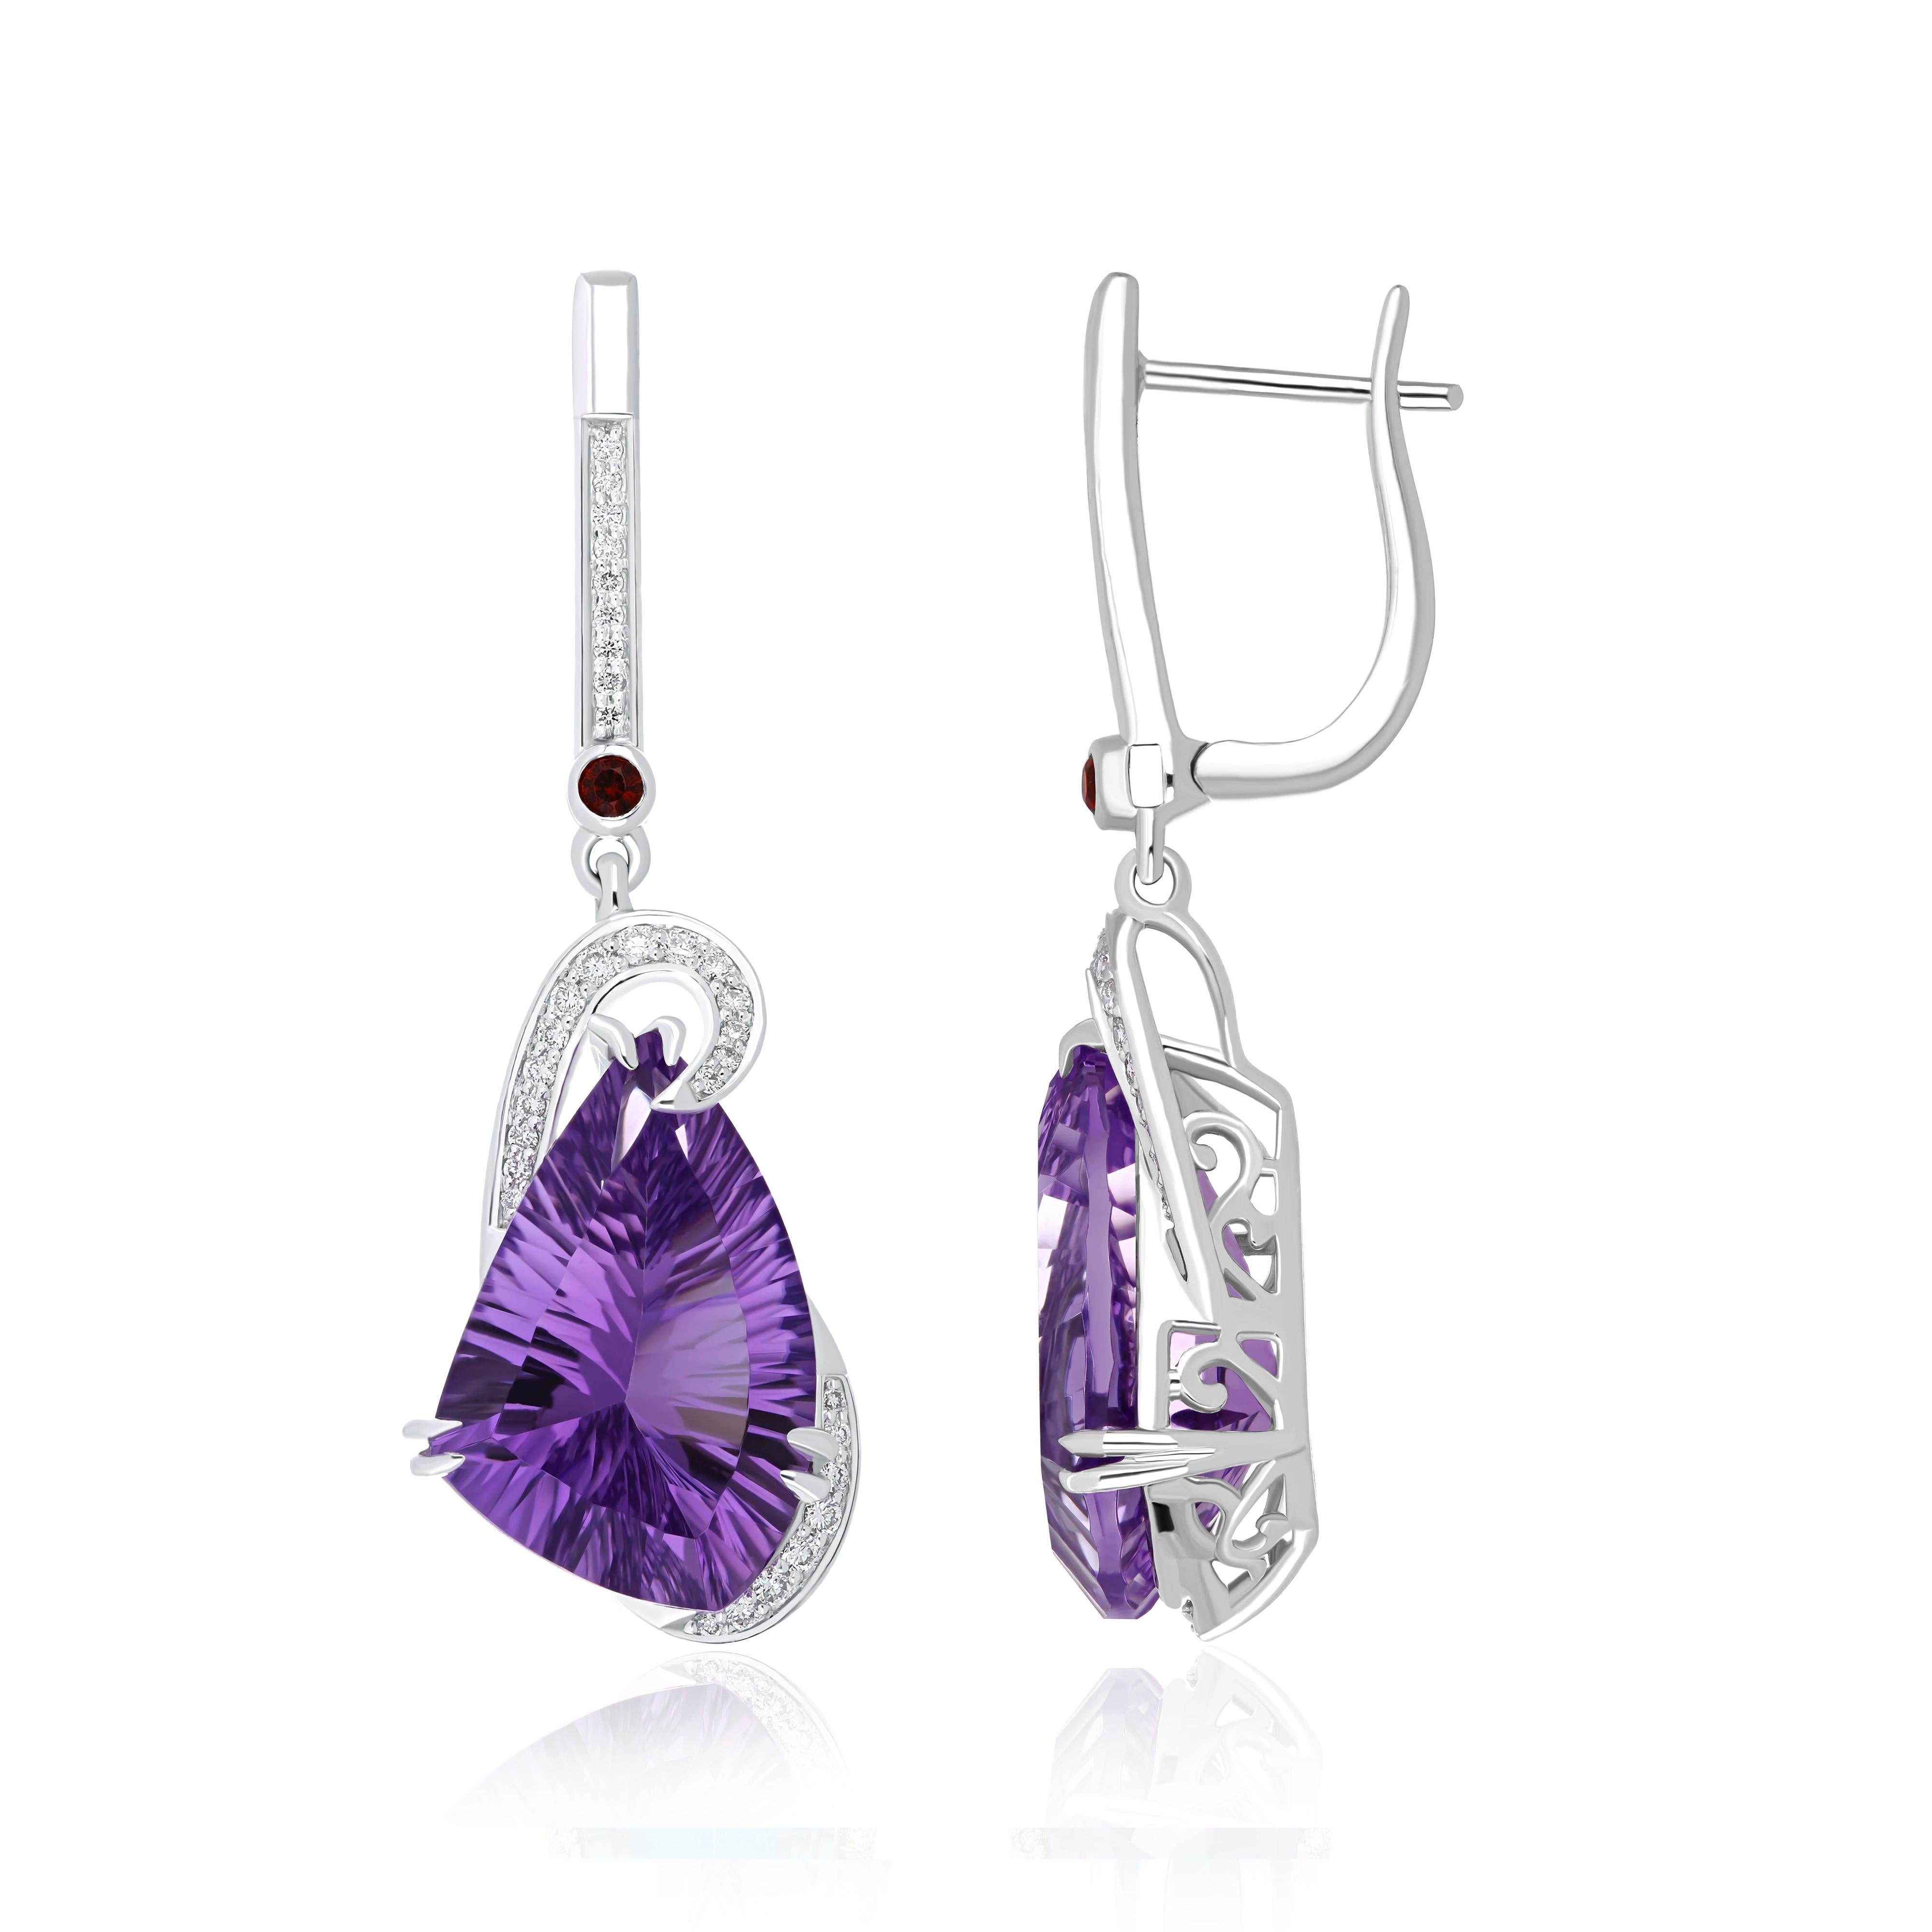 Elegant and Exquisitely Detailed 14 Karat White Gold Earring, Centre Set with 14.20Cts(approx.), Fancy Shape Concave cut Amethyst accented with contrasting Red Garnet weighing 0.10Cts(approx.), and Diamond with 0.32 Cts (approx.), 14Karat White Gold